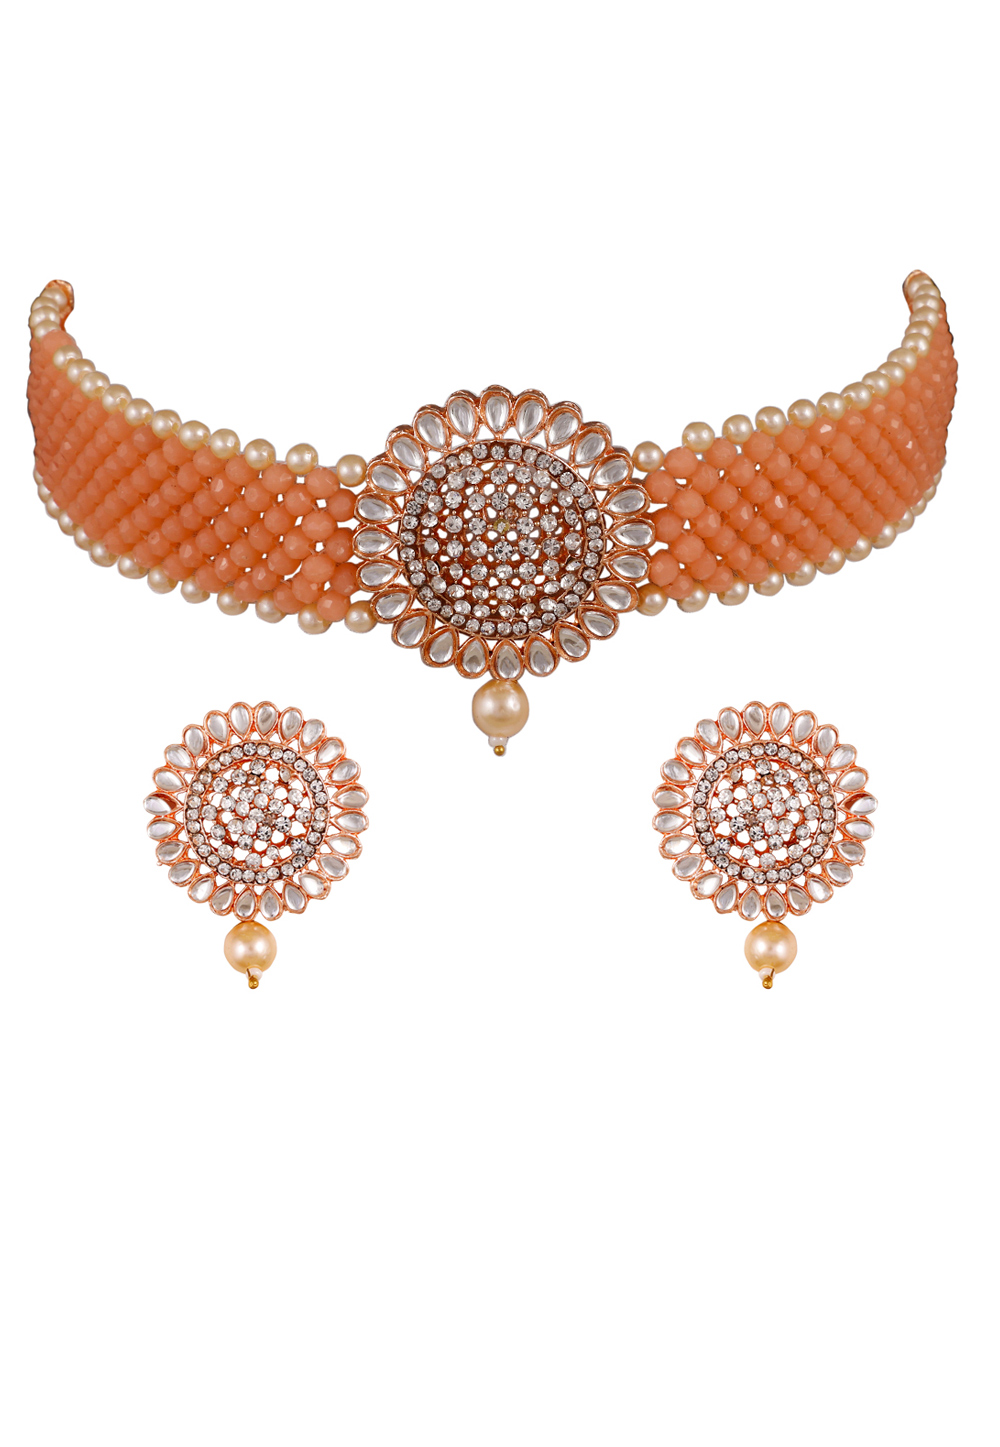 Peach Alloy Artificial Stone Necklace Set Earrings 254174